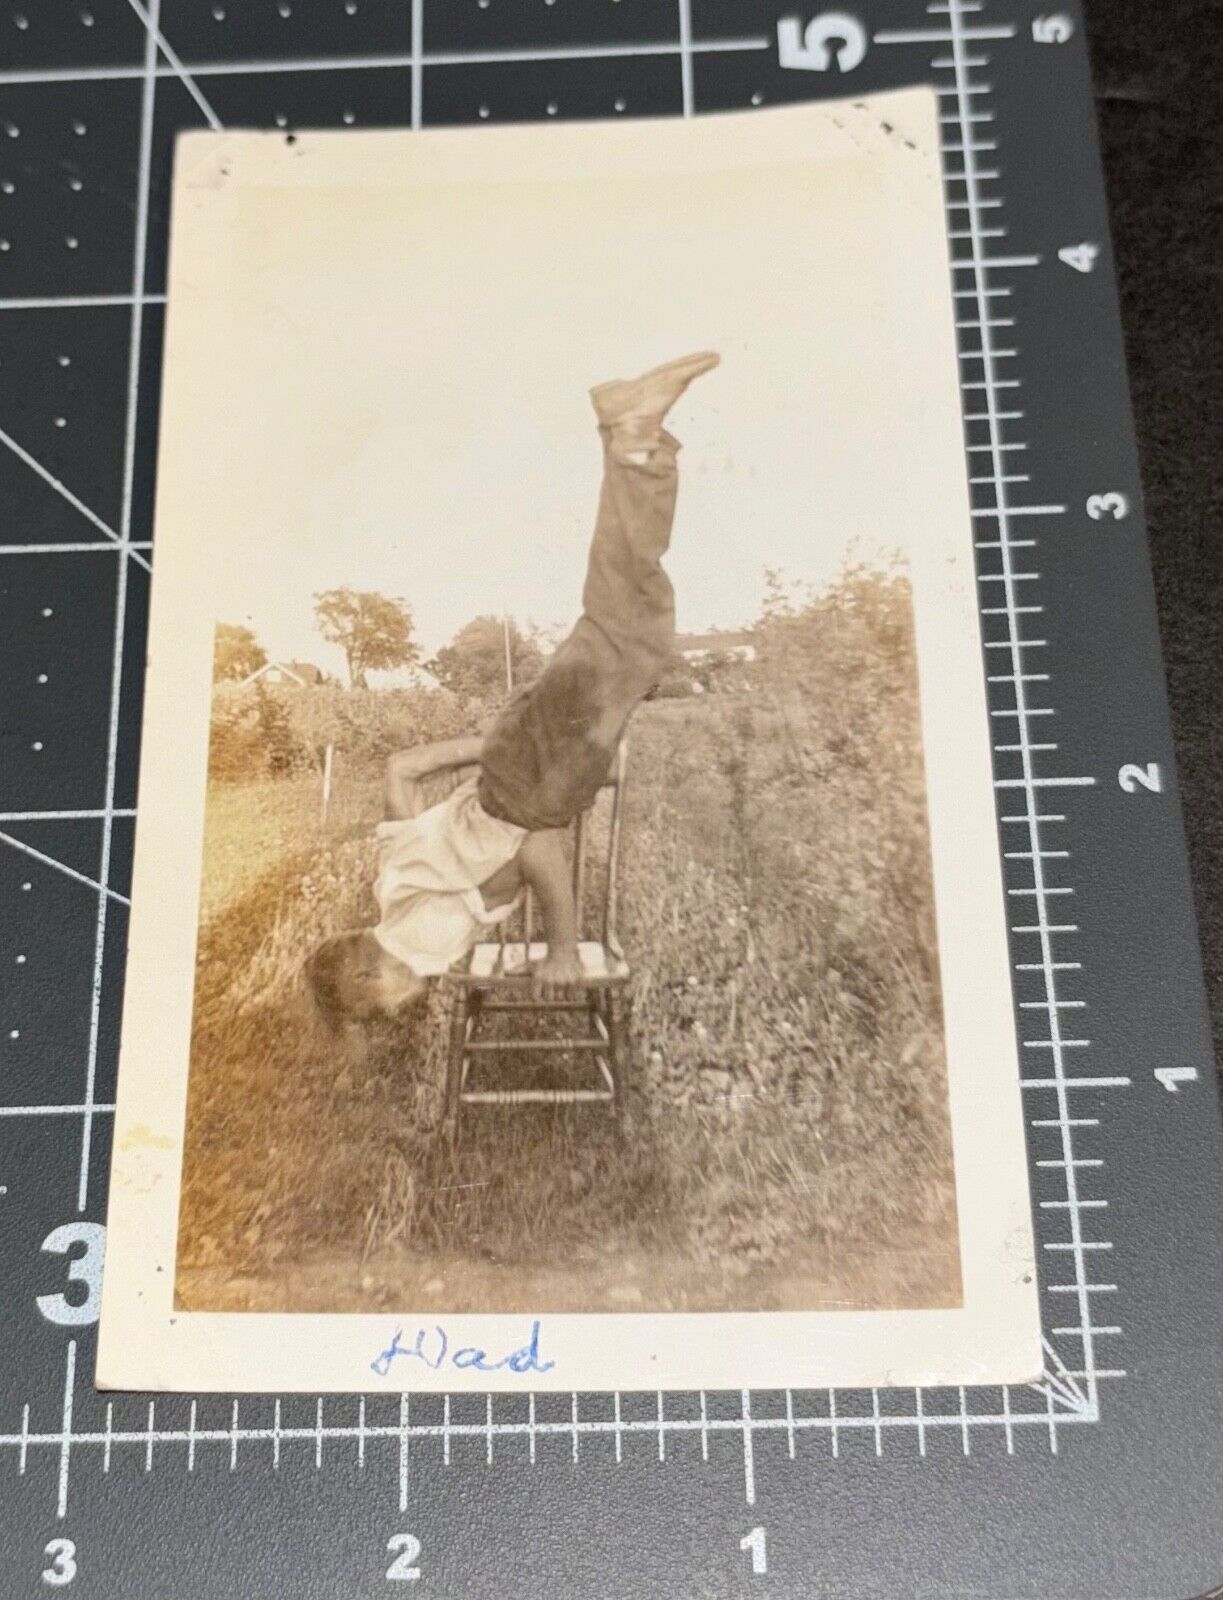 Strong Man HEADSTAND on Chair Acrobat 1920s Vintage Snapshot PHOTO